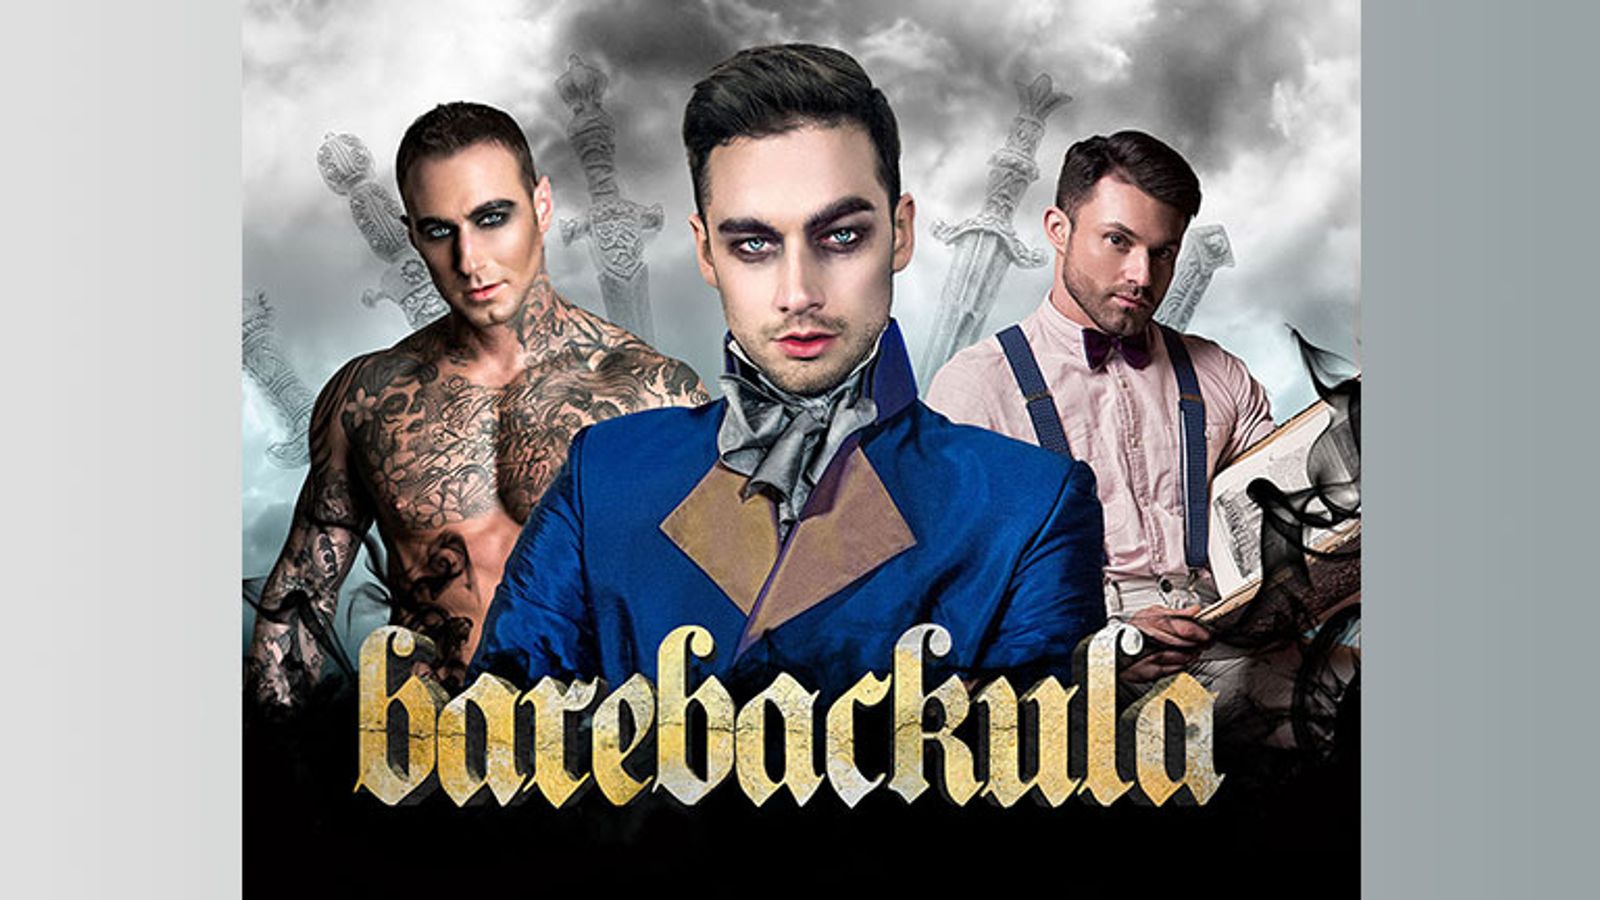 'Barebackula Is Coming'—From Lucas Entertainment